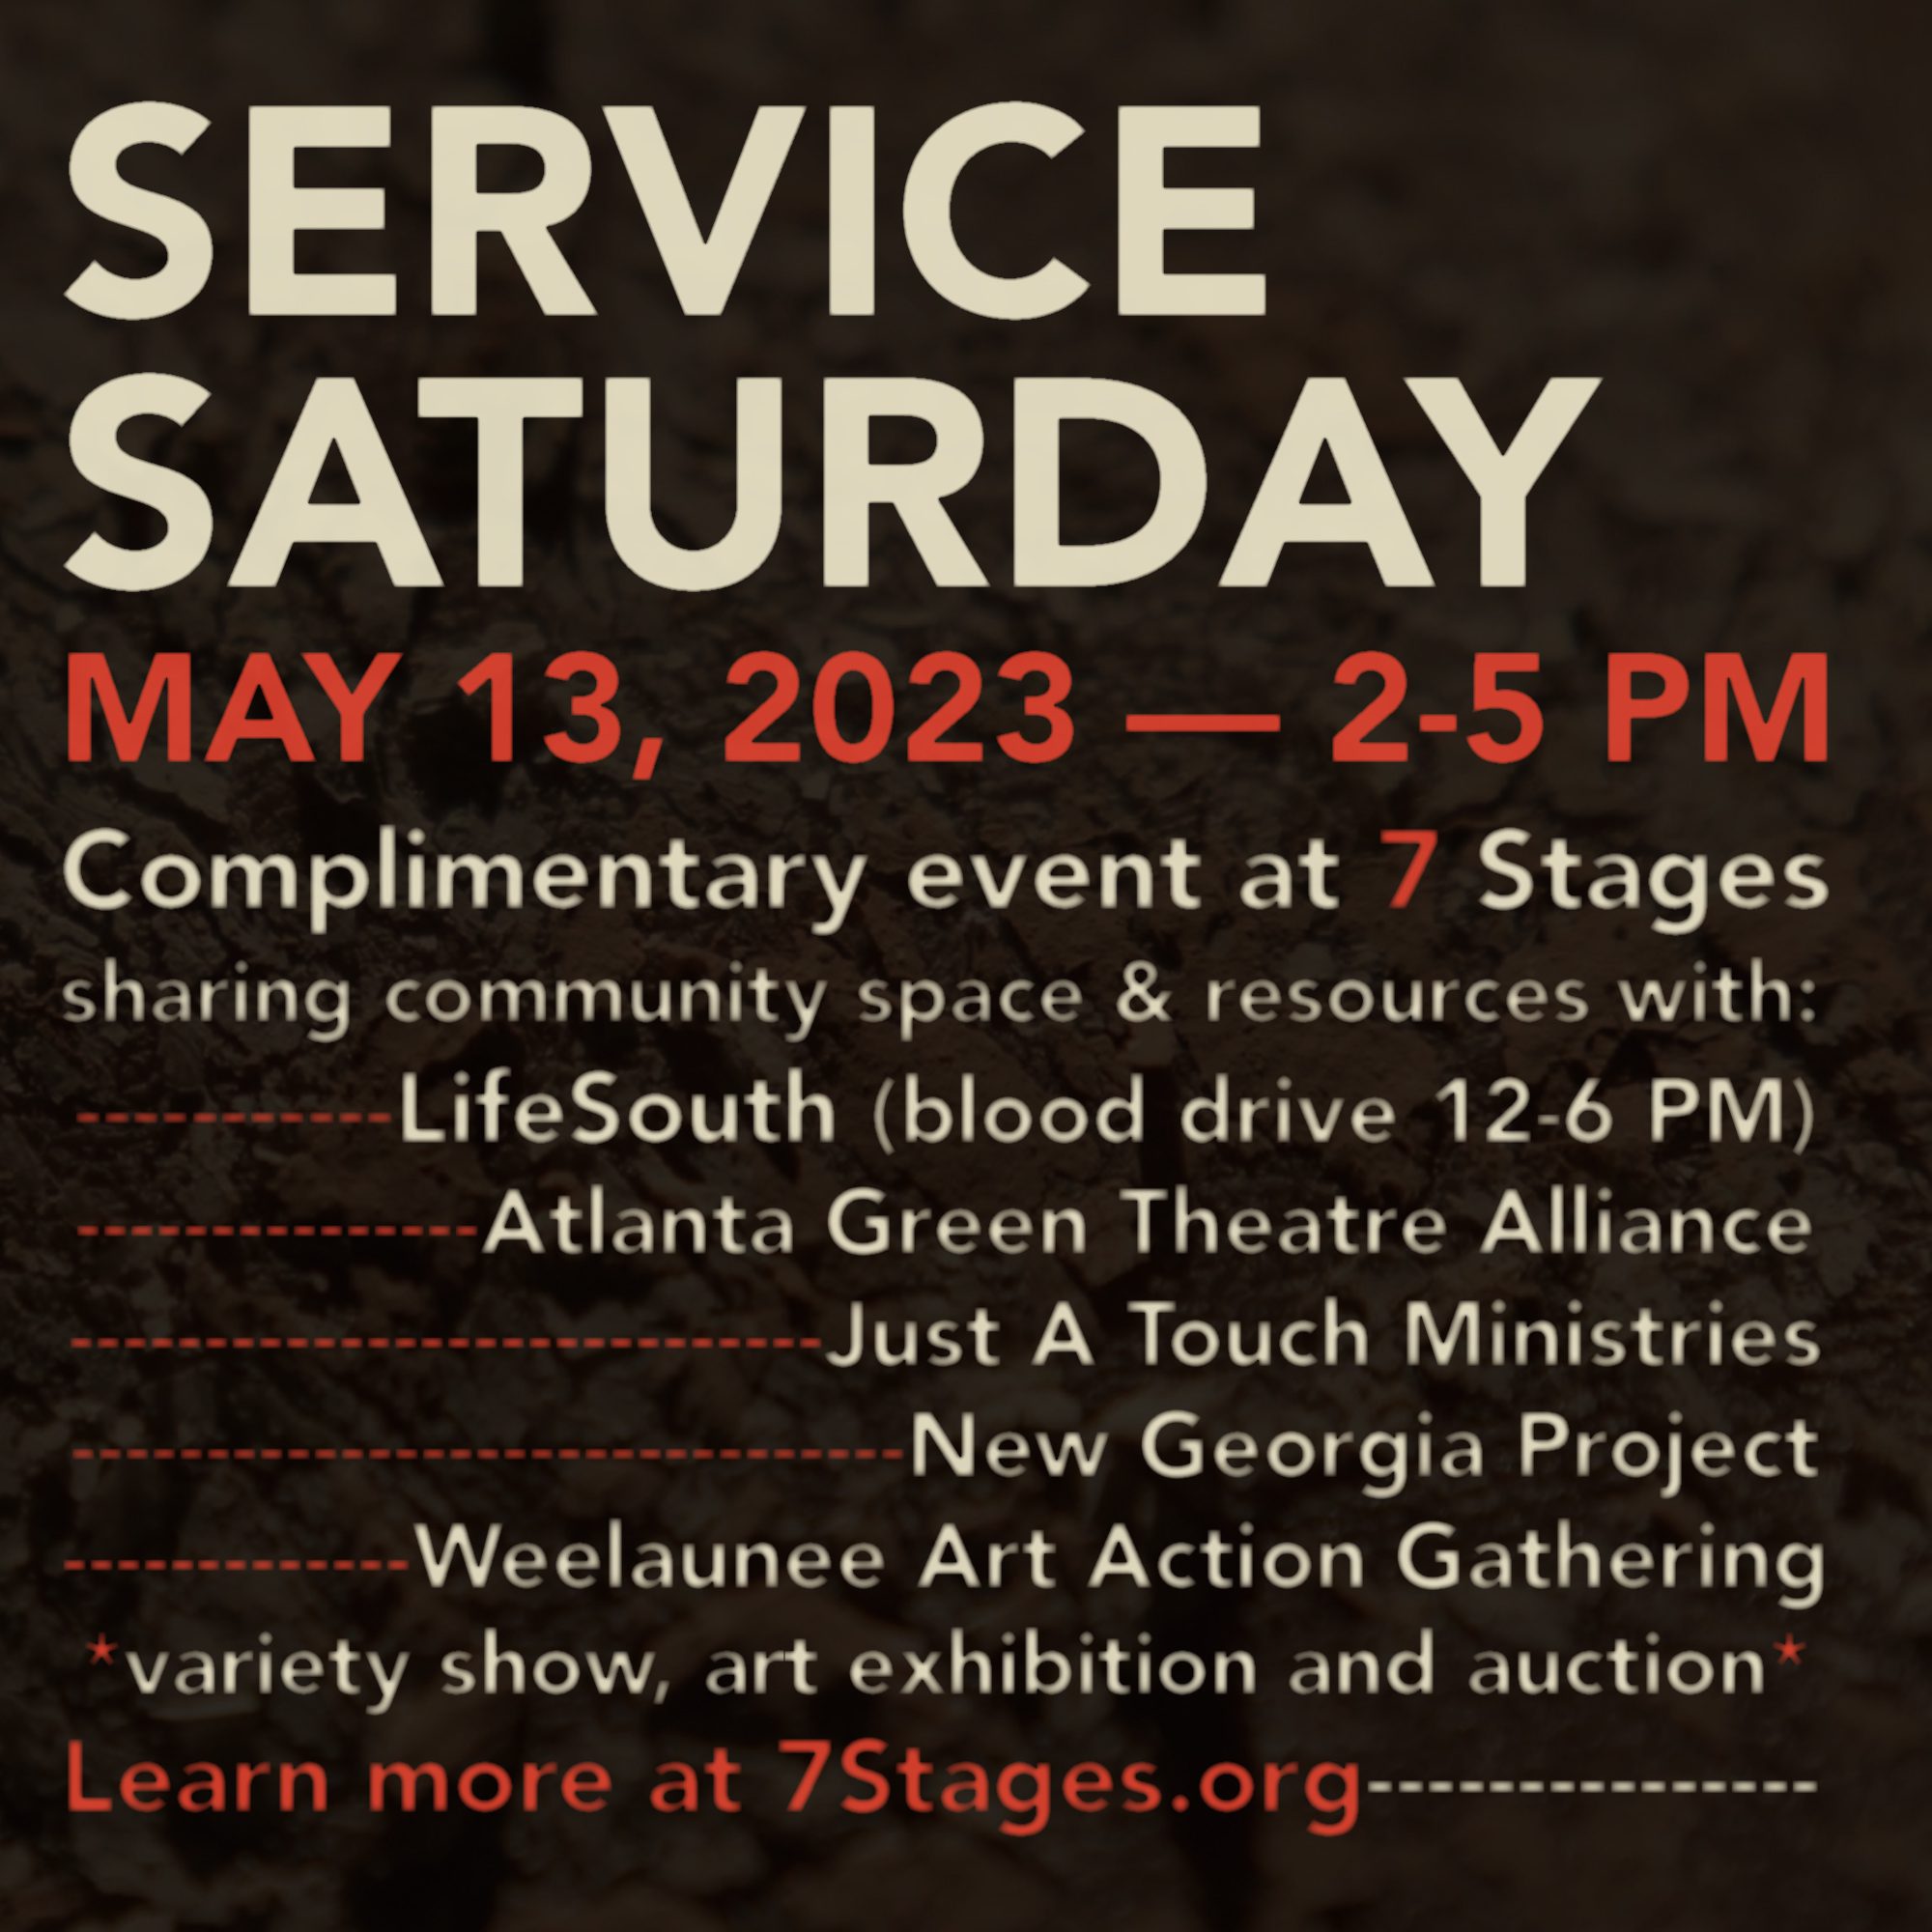 Service Saturday, May 12, 2023 from 2 to 5 PM.